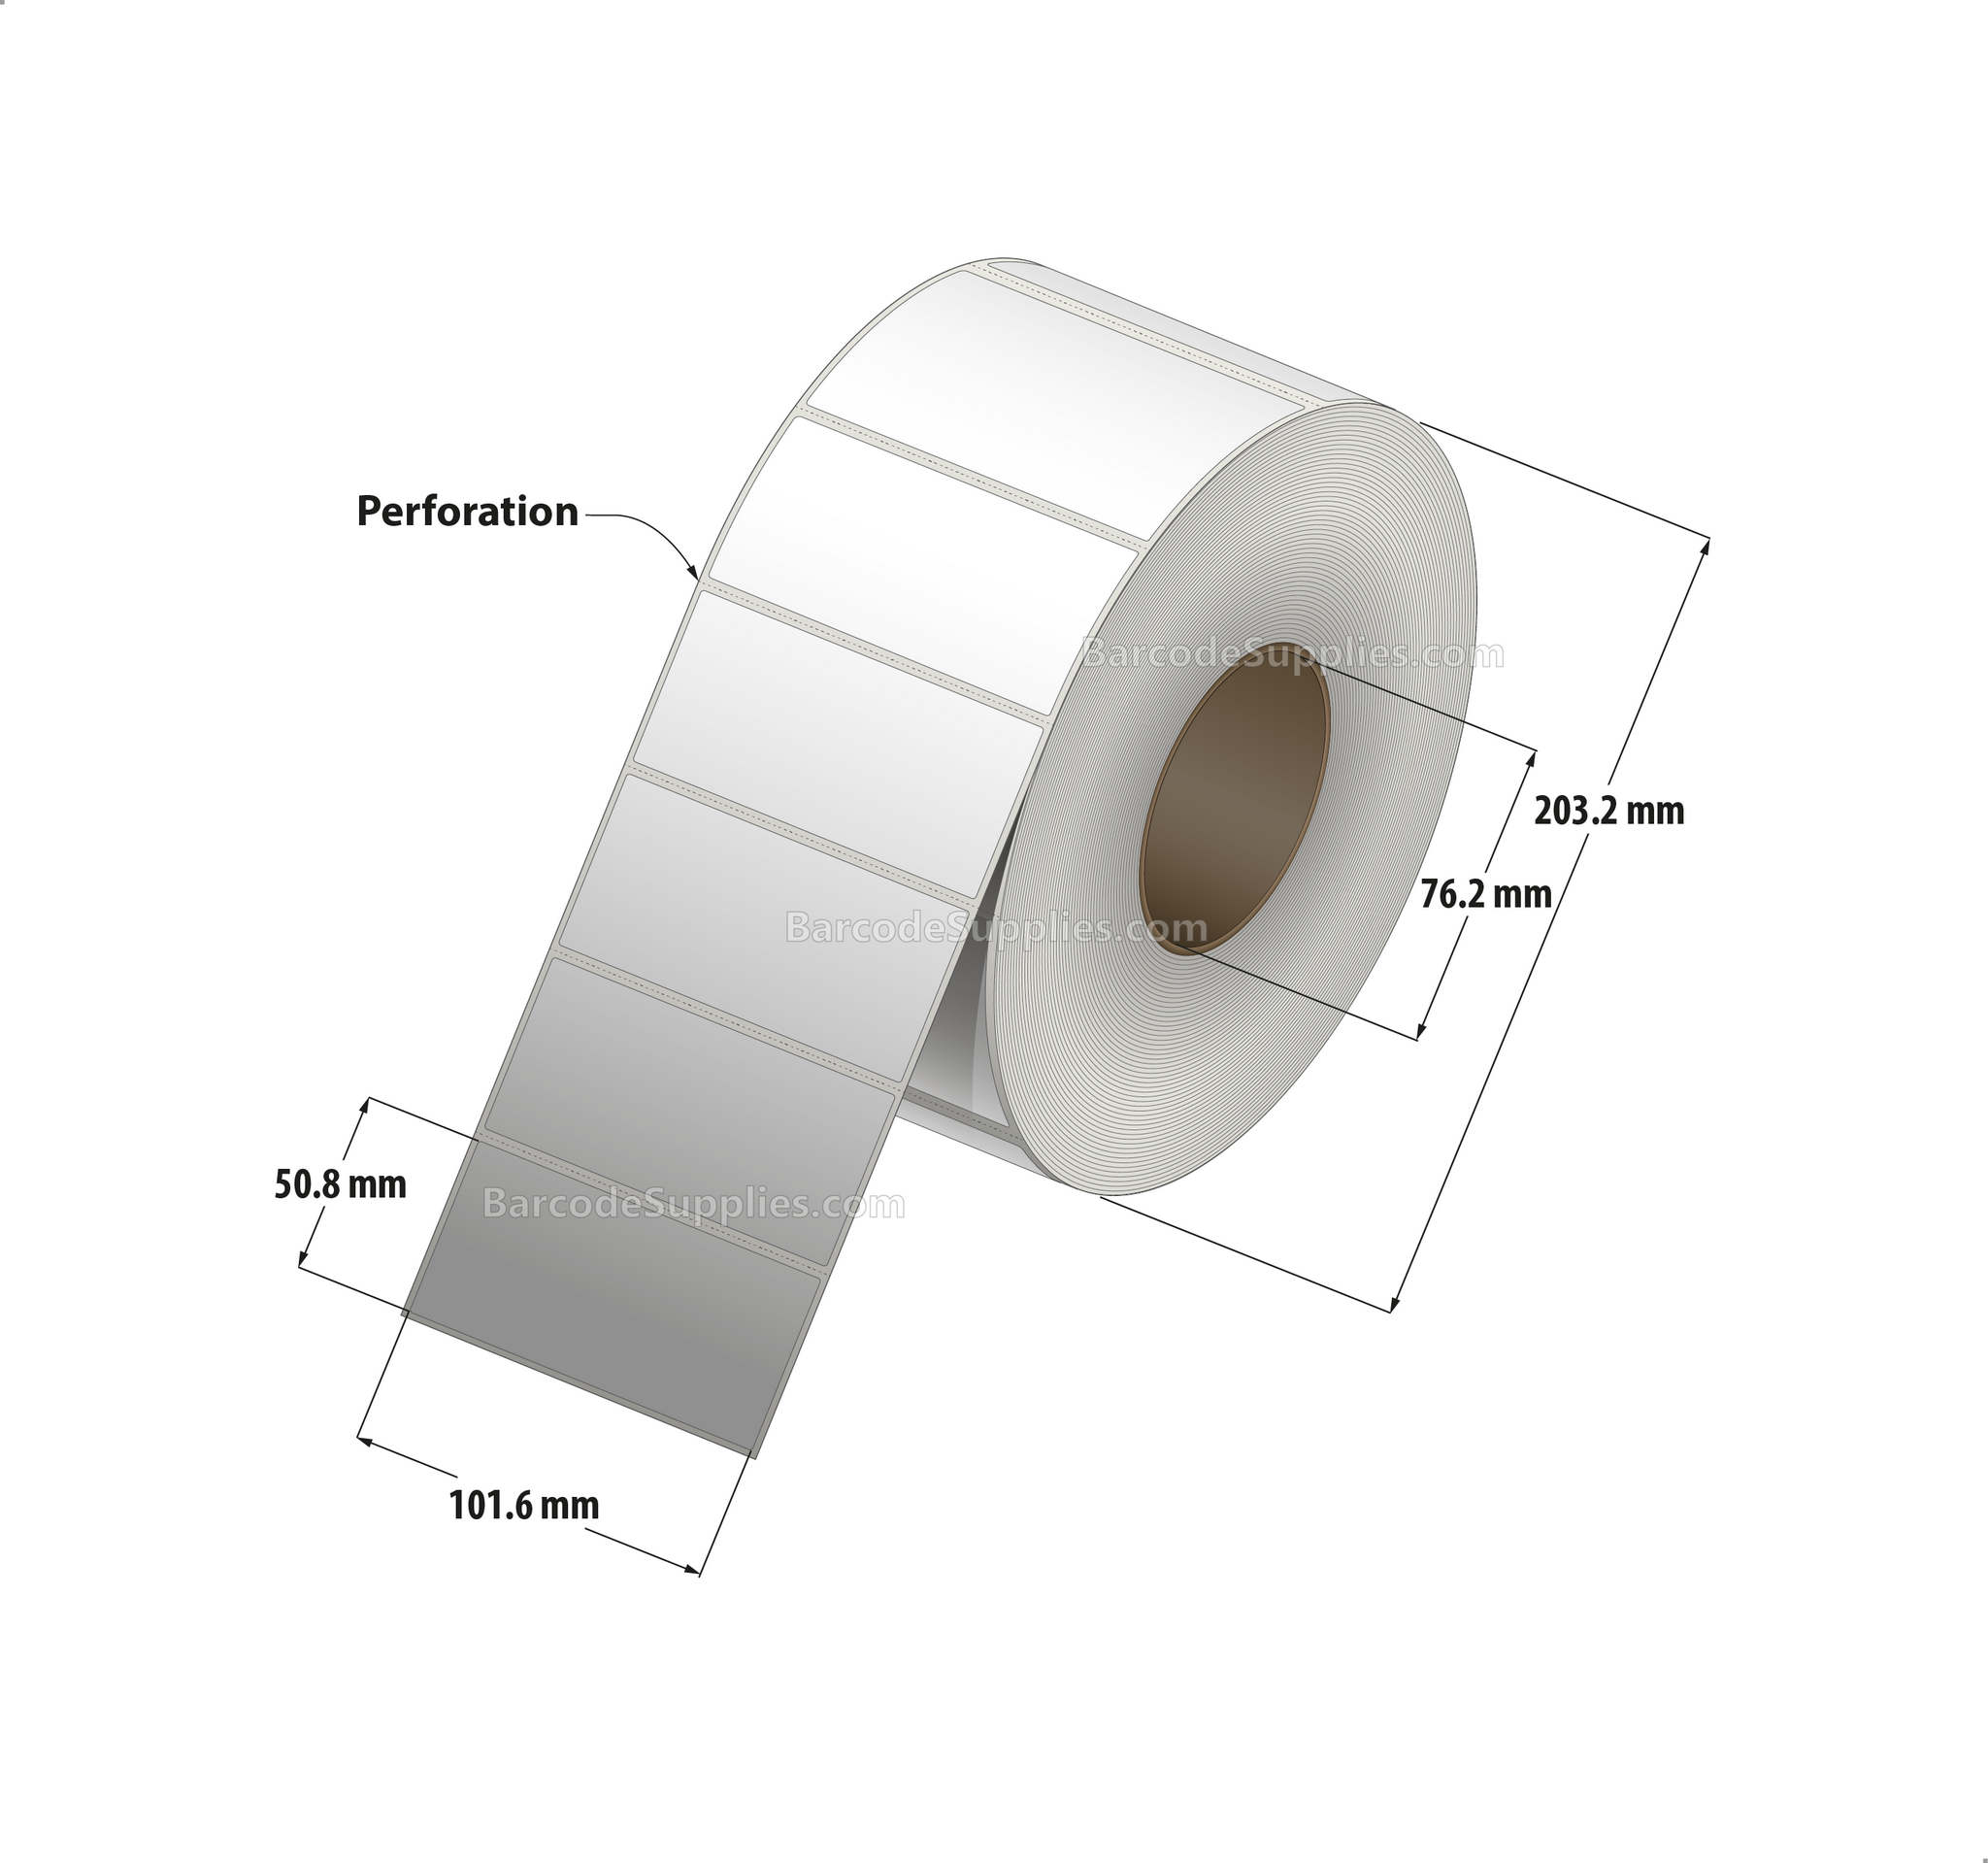 4 x 2 Thermal Transfer White Labels With Permanent Adhesive - Perforated - 3000 Labels Per Roll - Carton Of 4 Rolls - 12000 Labels Total - MPN: RP-4-2-3000-3